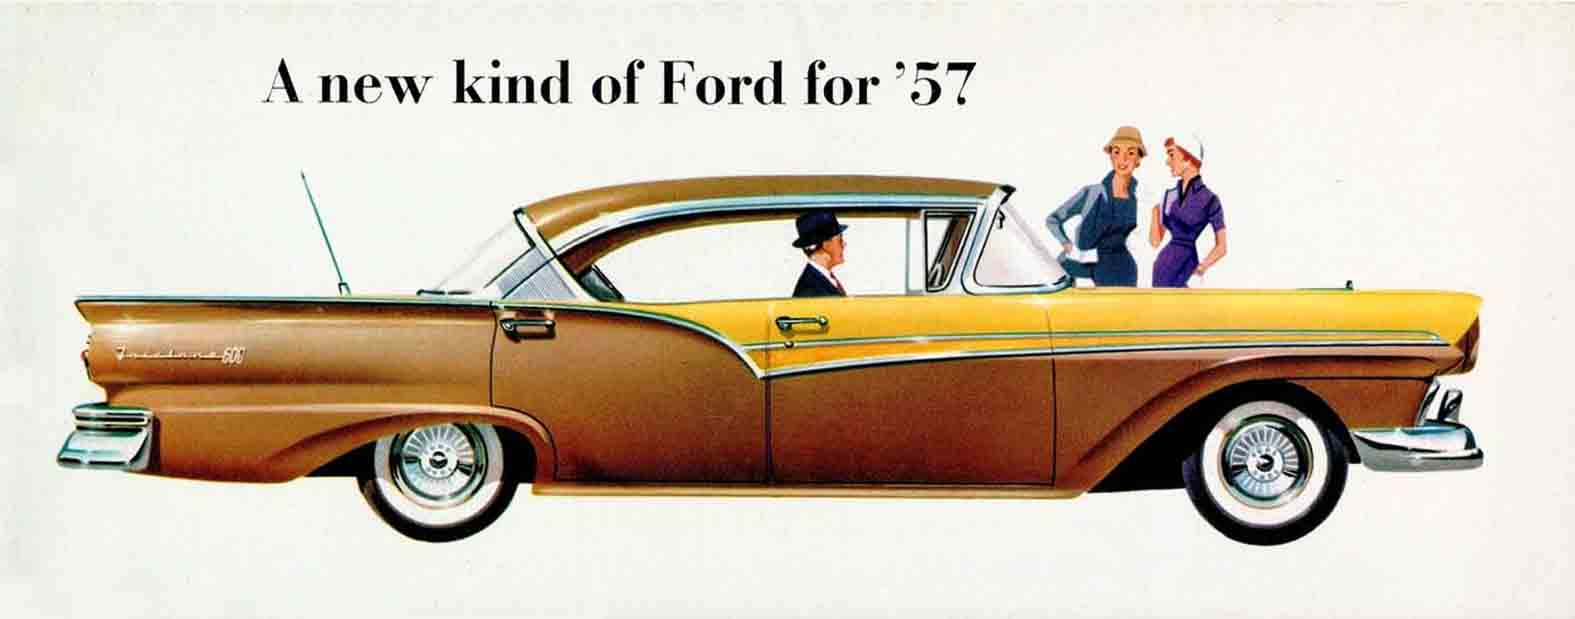 1957_Ford_Foldout-01a